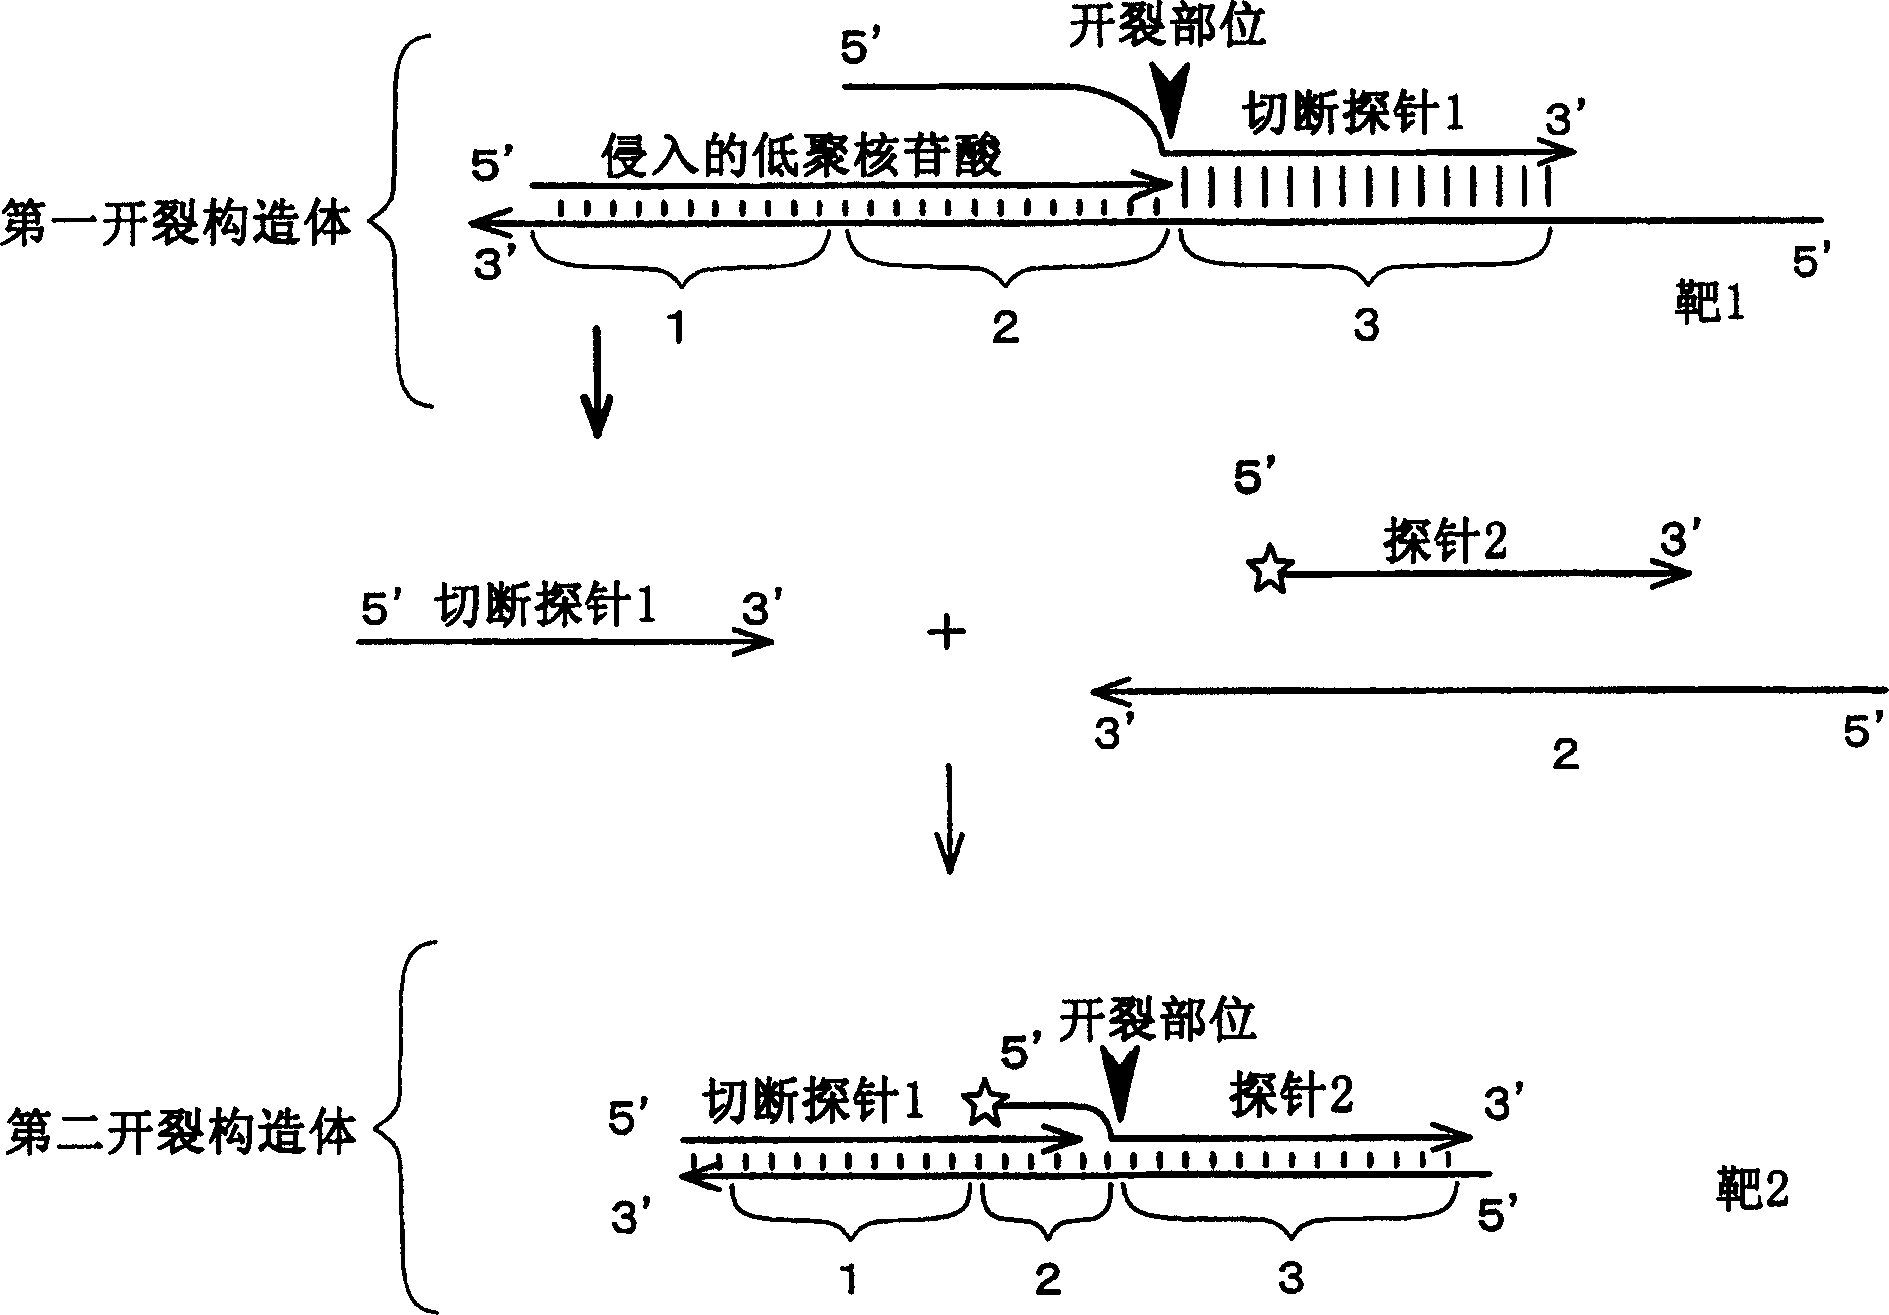 Method of detecting inorganic phosphoric acid, pyrophosphate and nucleic acid, and method of typing snp sequence of DNA